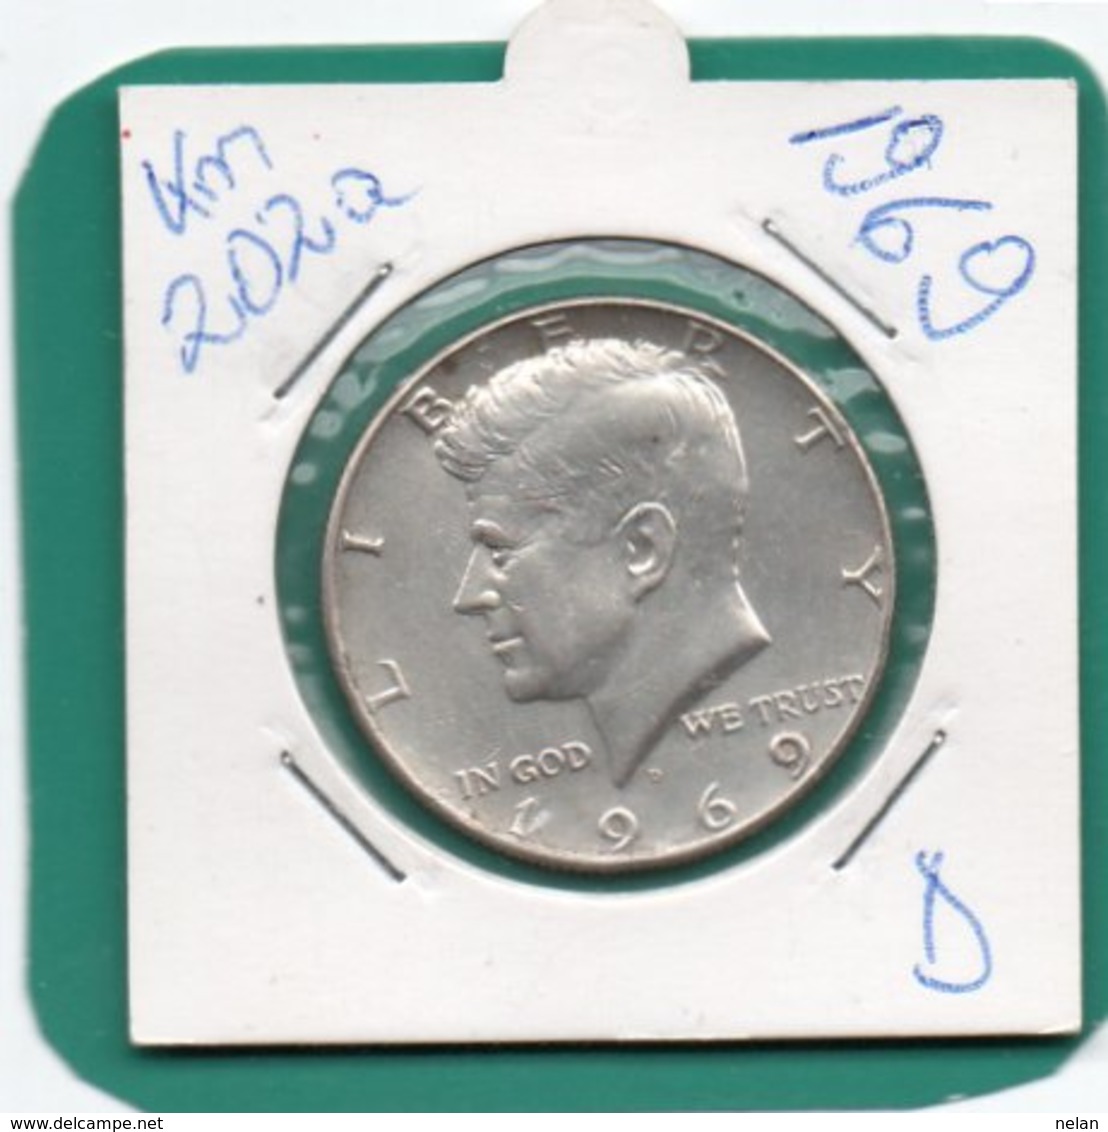 UNITED STATES OF AMERICA  50 CENTS 1969  D   KM-2002a  SILVER AUNC - 1964-…: Kennedy